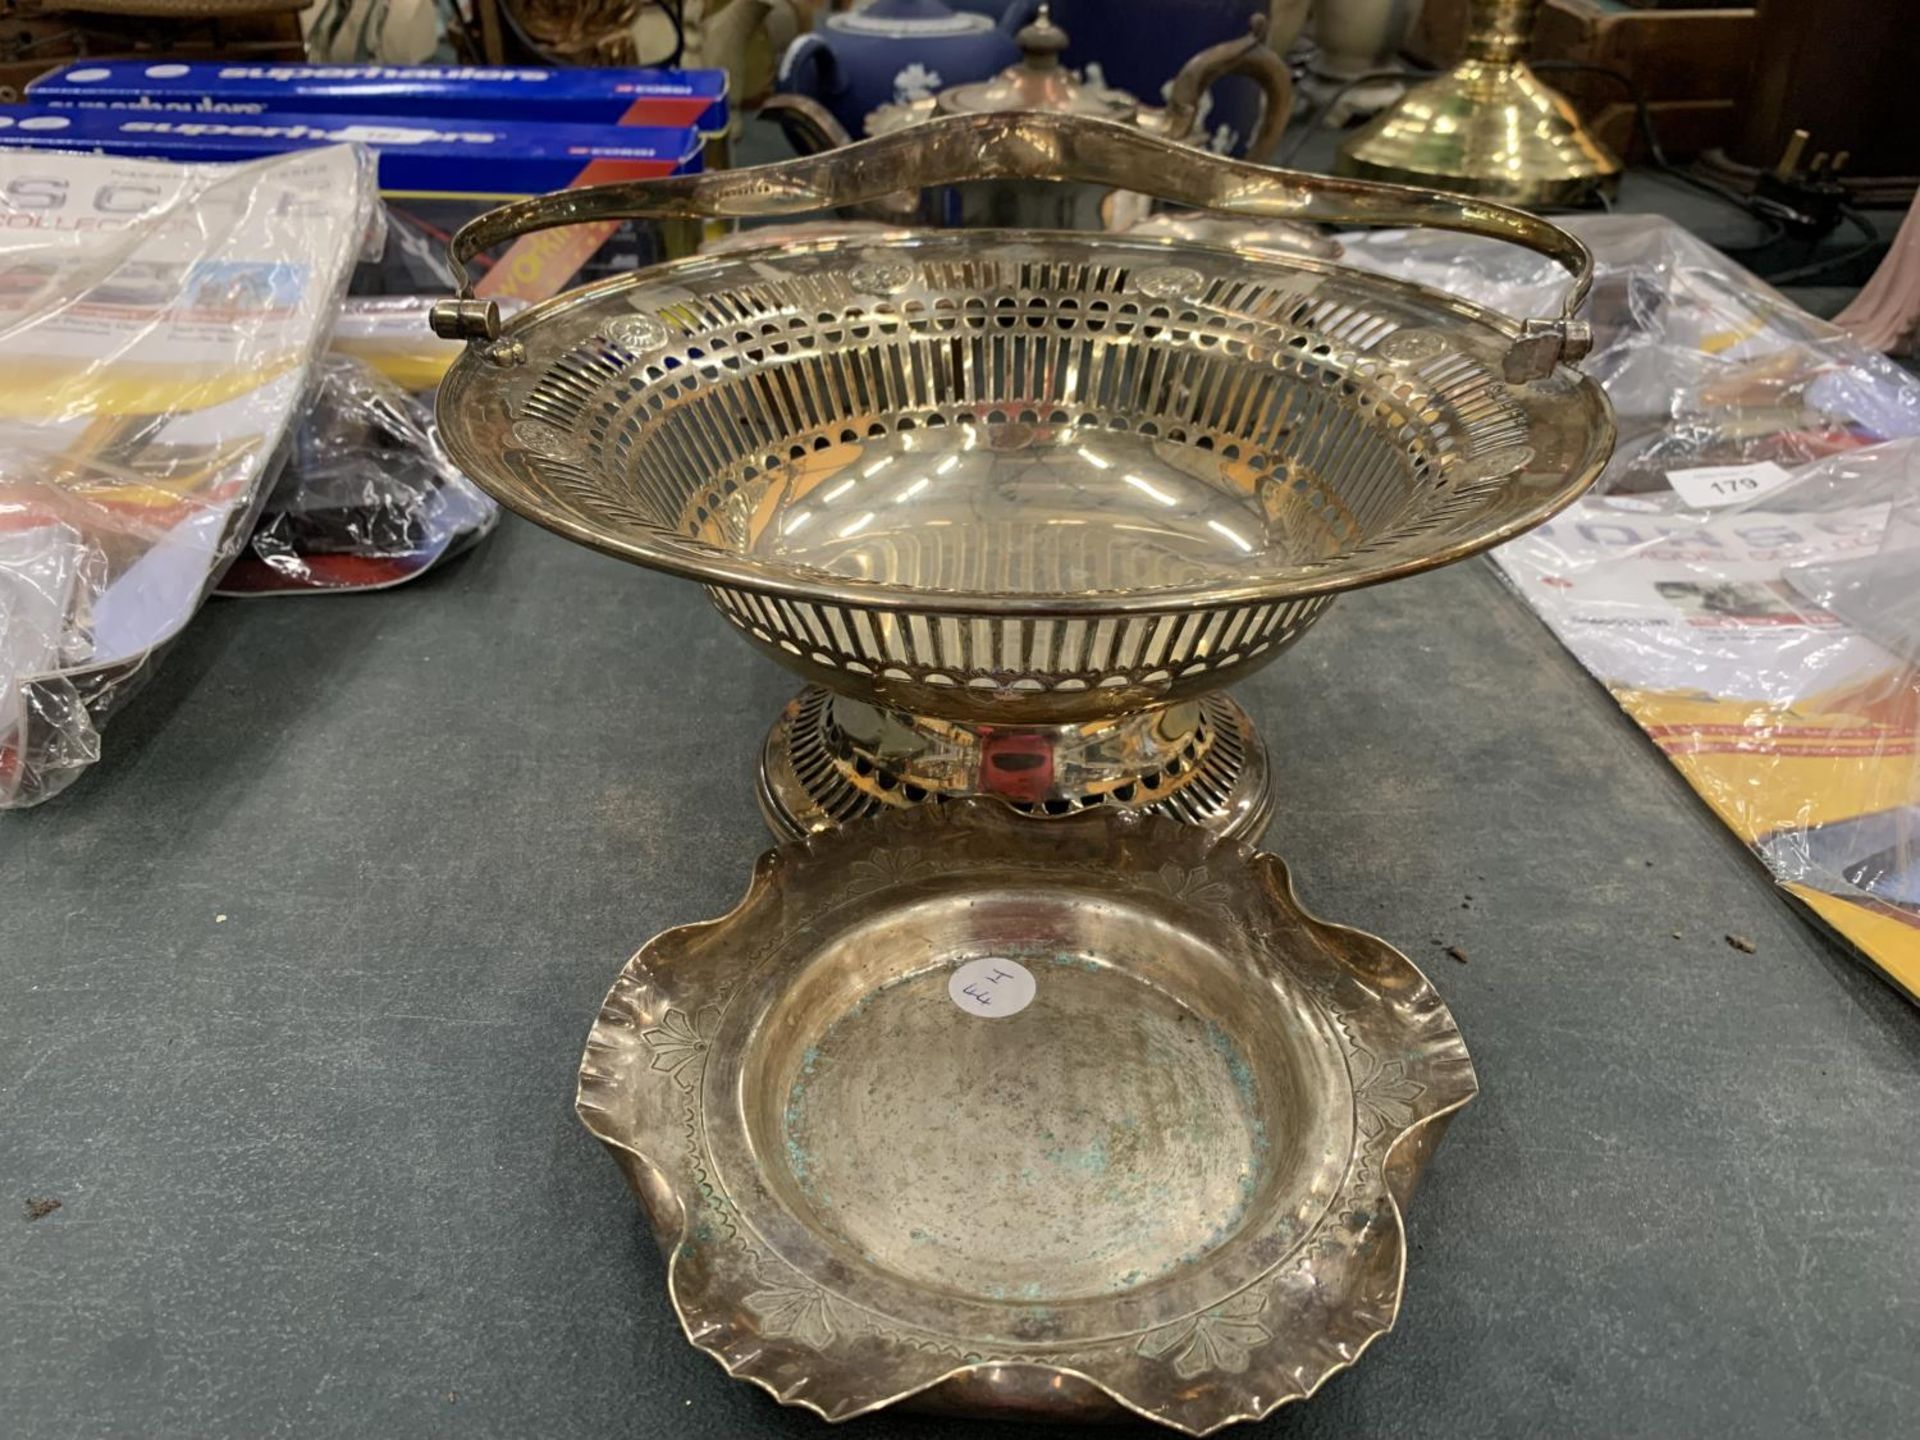 TWO VINTAGE SILVER PLATED ITEMS - PEDESTAL BOWL WITH PIERCED GALLERY DESIGN AND SMALLER DISH - Image 5 of 5